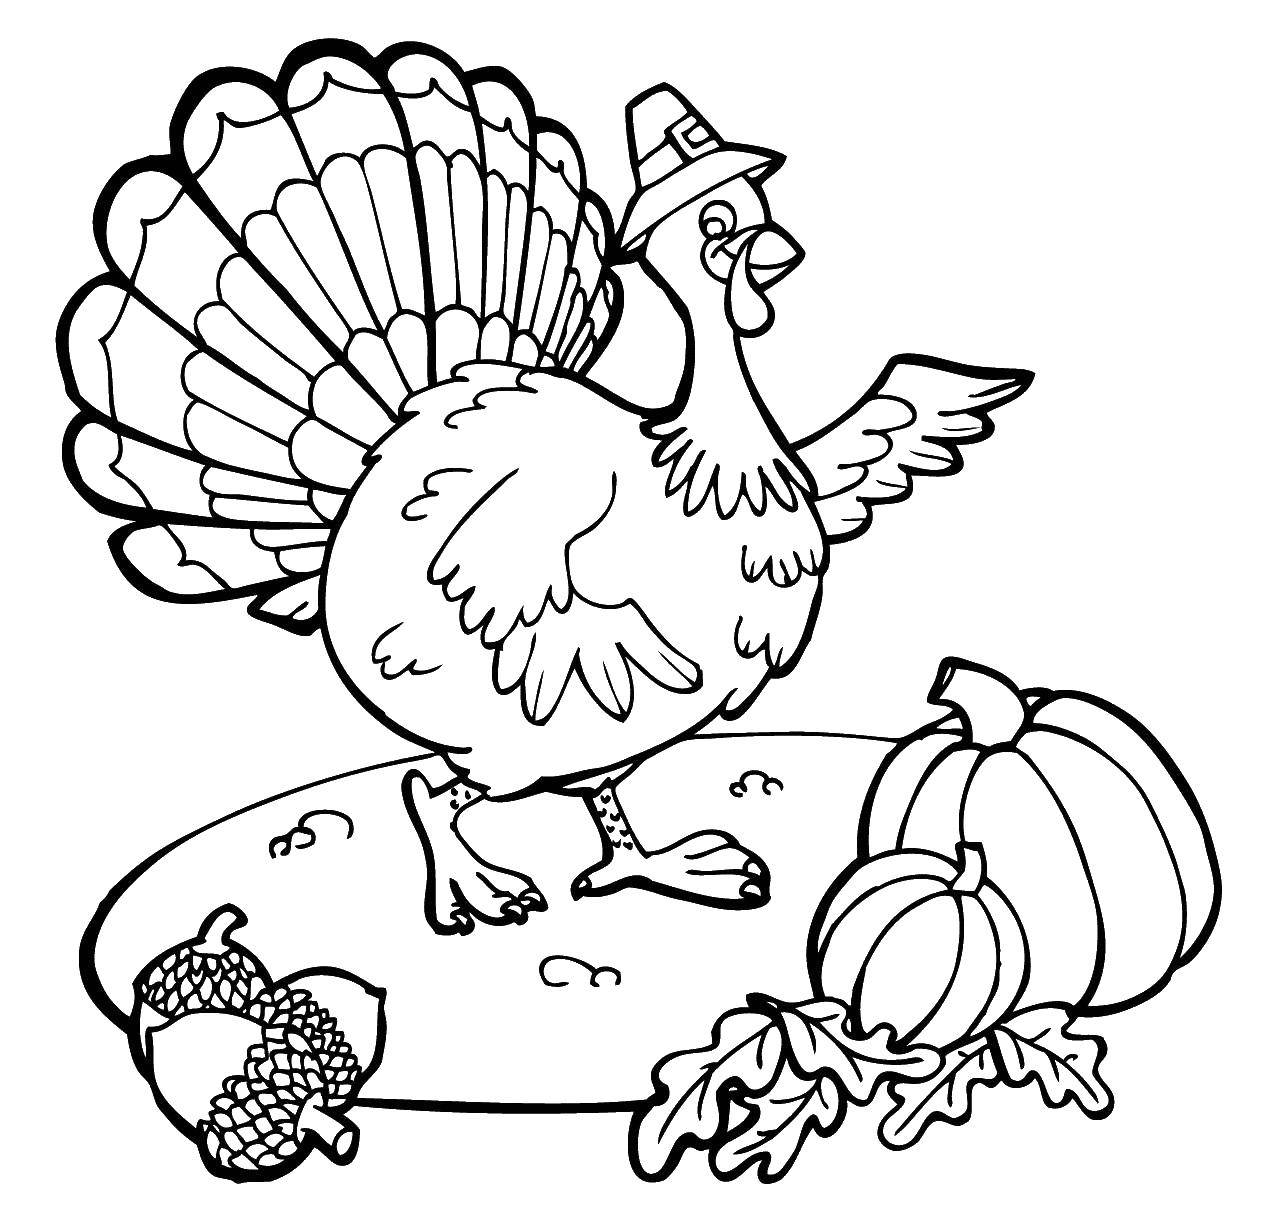 Coloring The Turkey goes by the acorns and pumpkins. Category birds. Tags:  Poultry, Turkey.